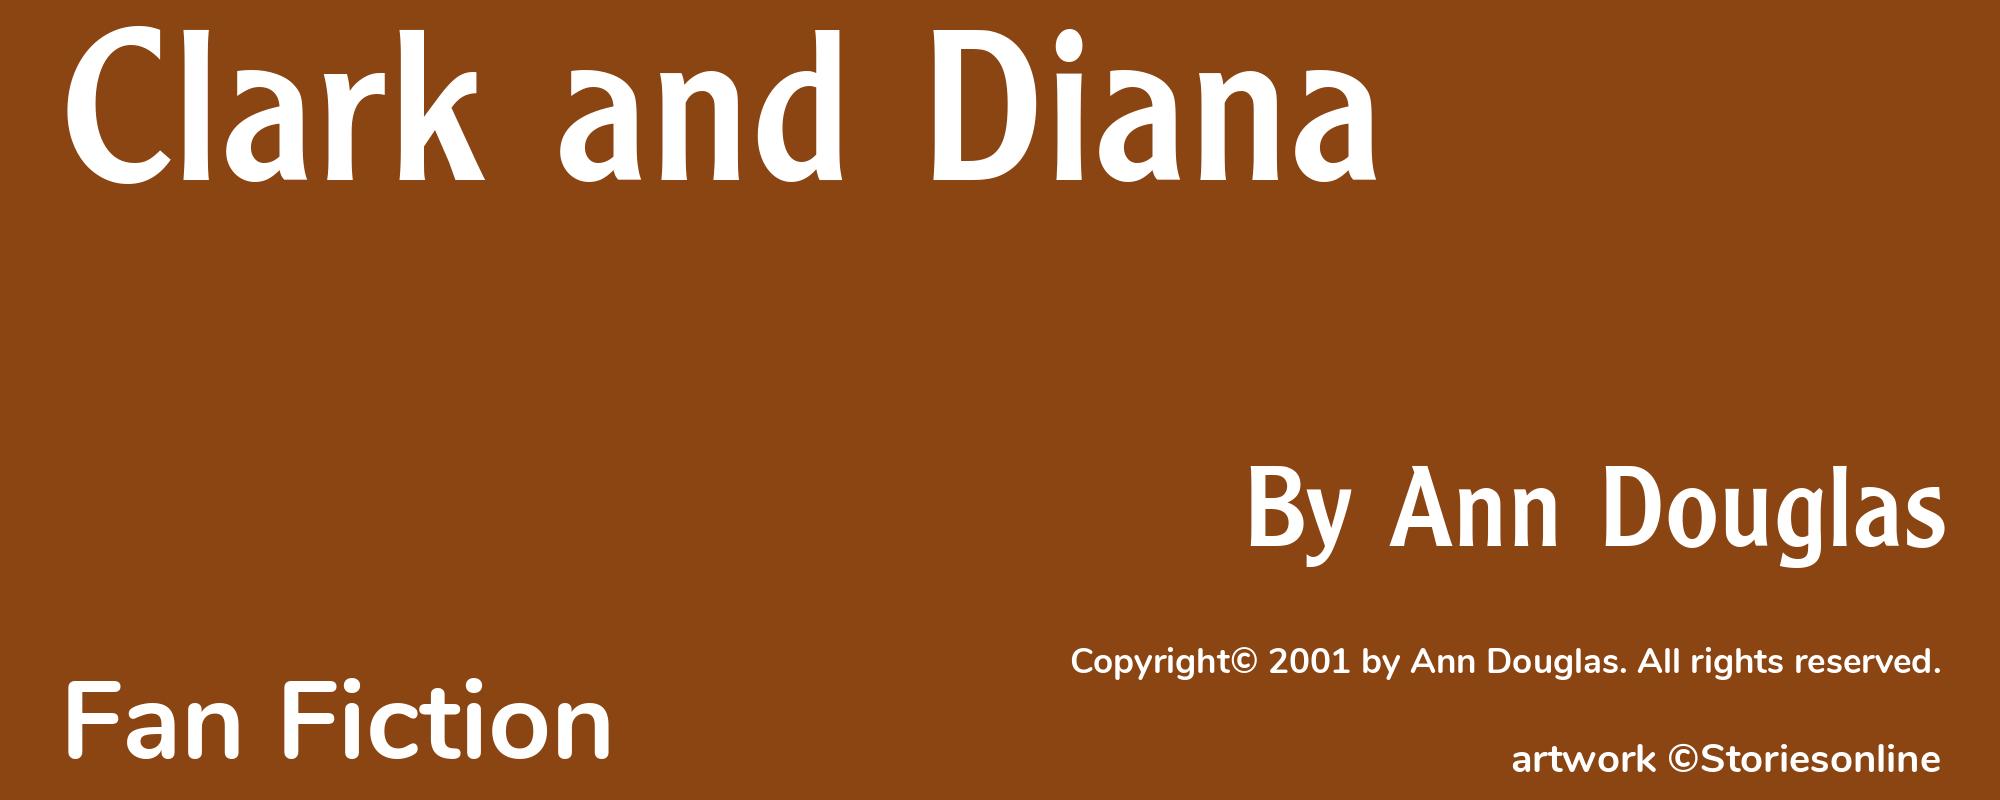 Clark and Diana - Cover